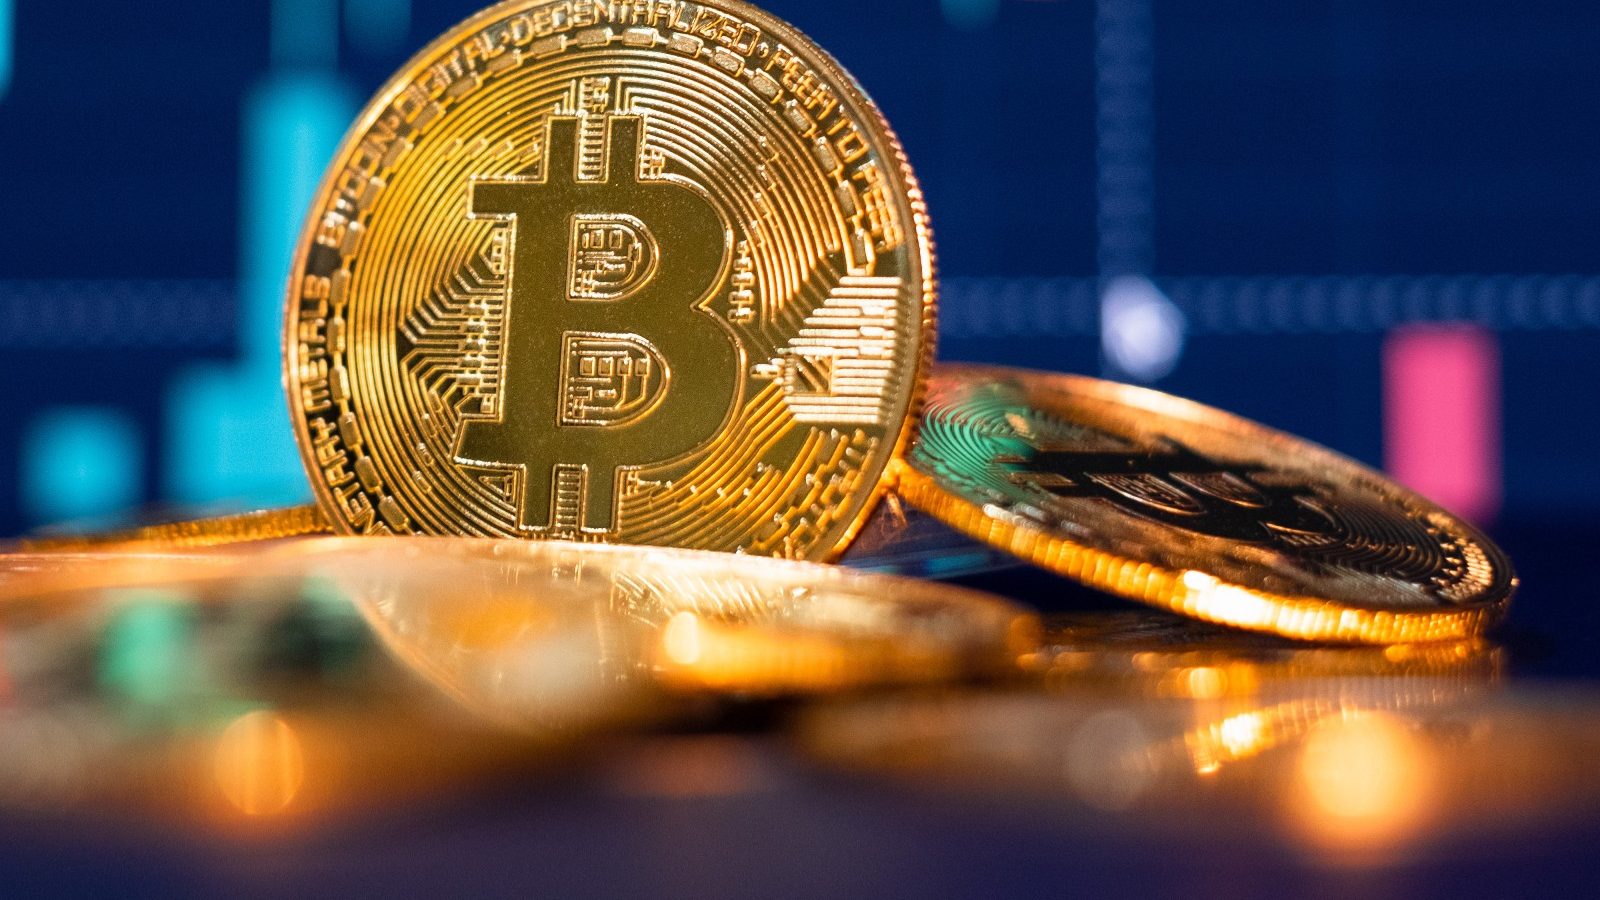 Bitcoin is now unlikely to fall into a bear market with Aave, Algorand, Litecoin, NFT News